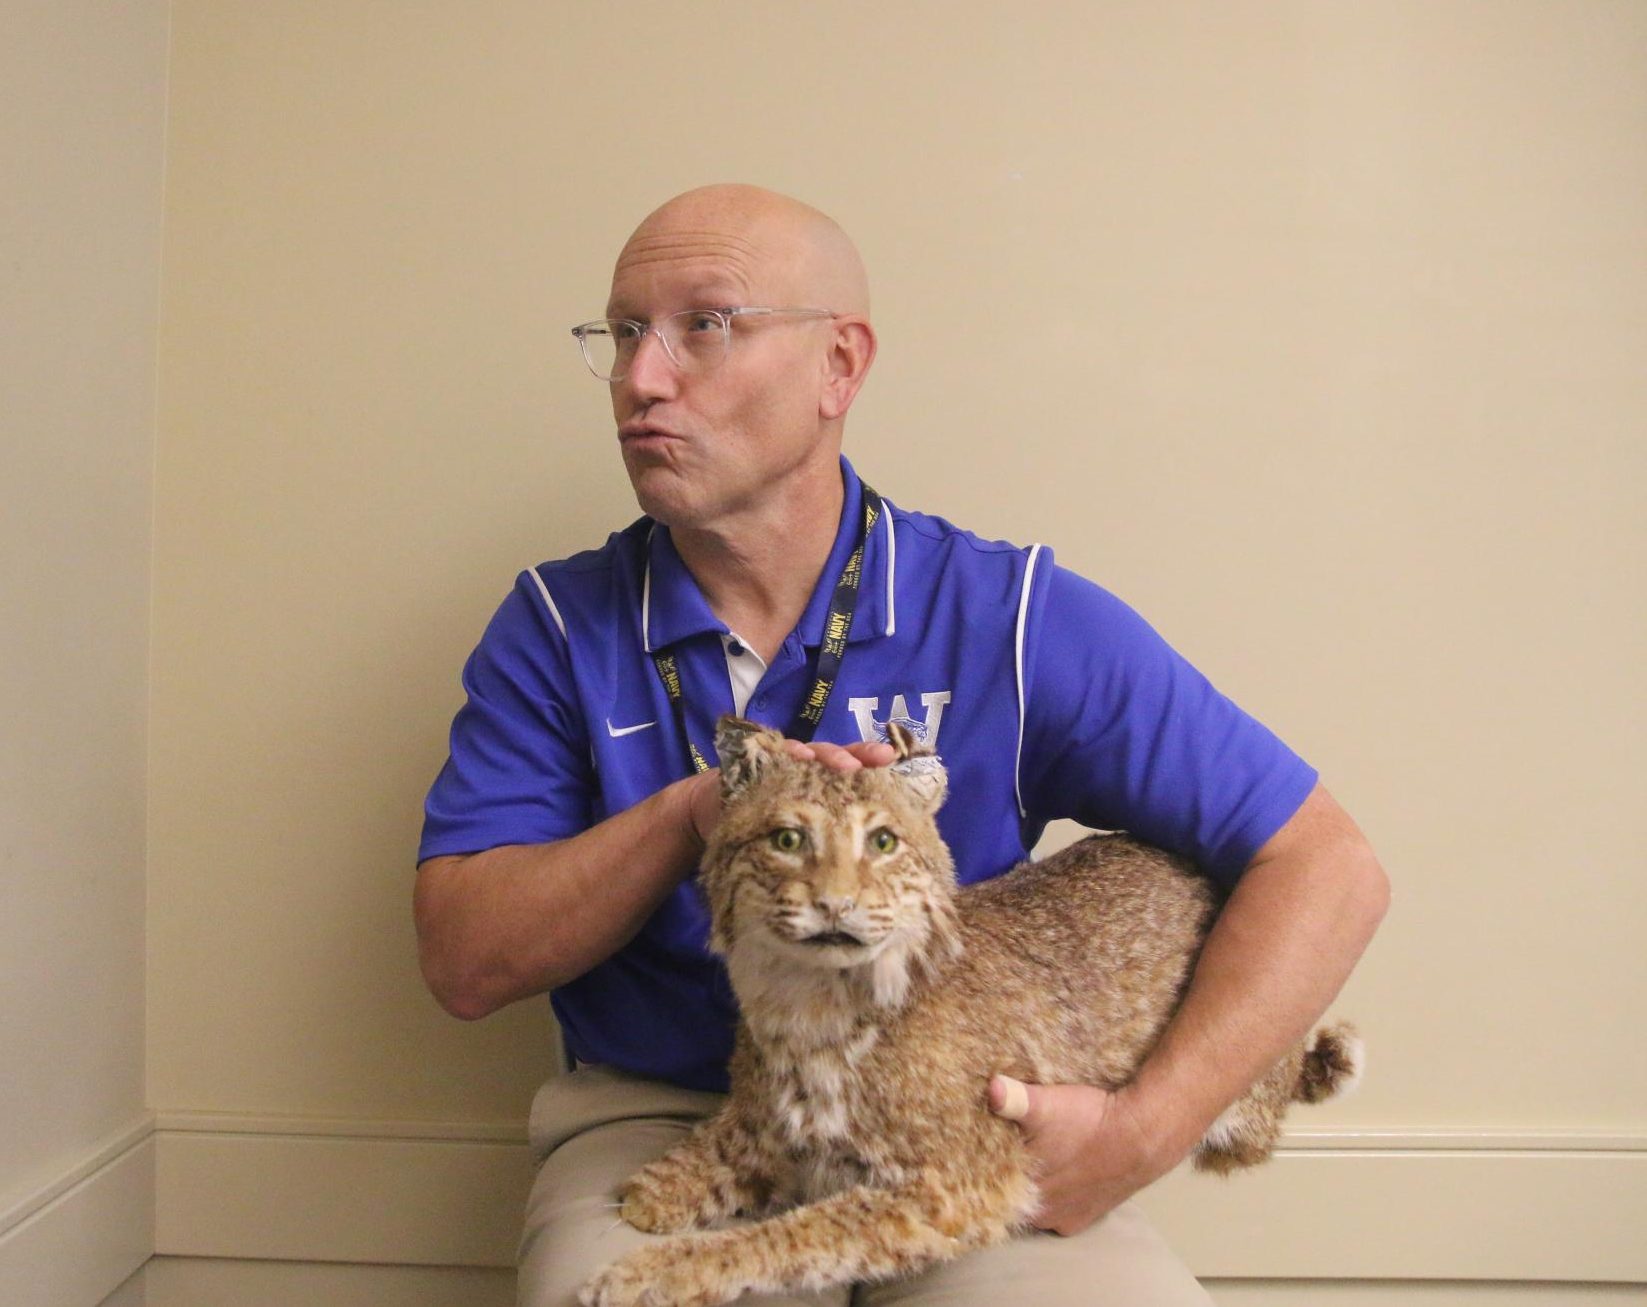 Mr. Knerr poses and holds his wildcat.